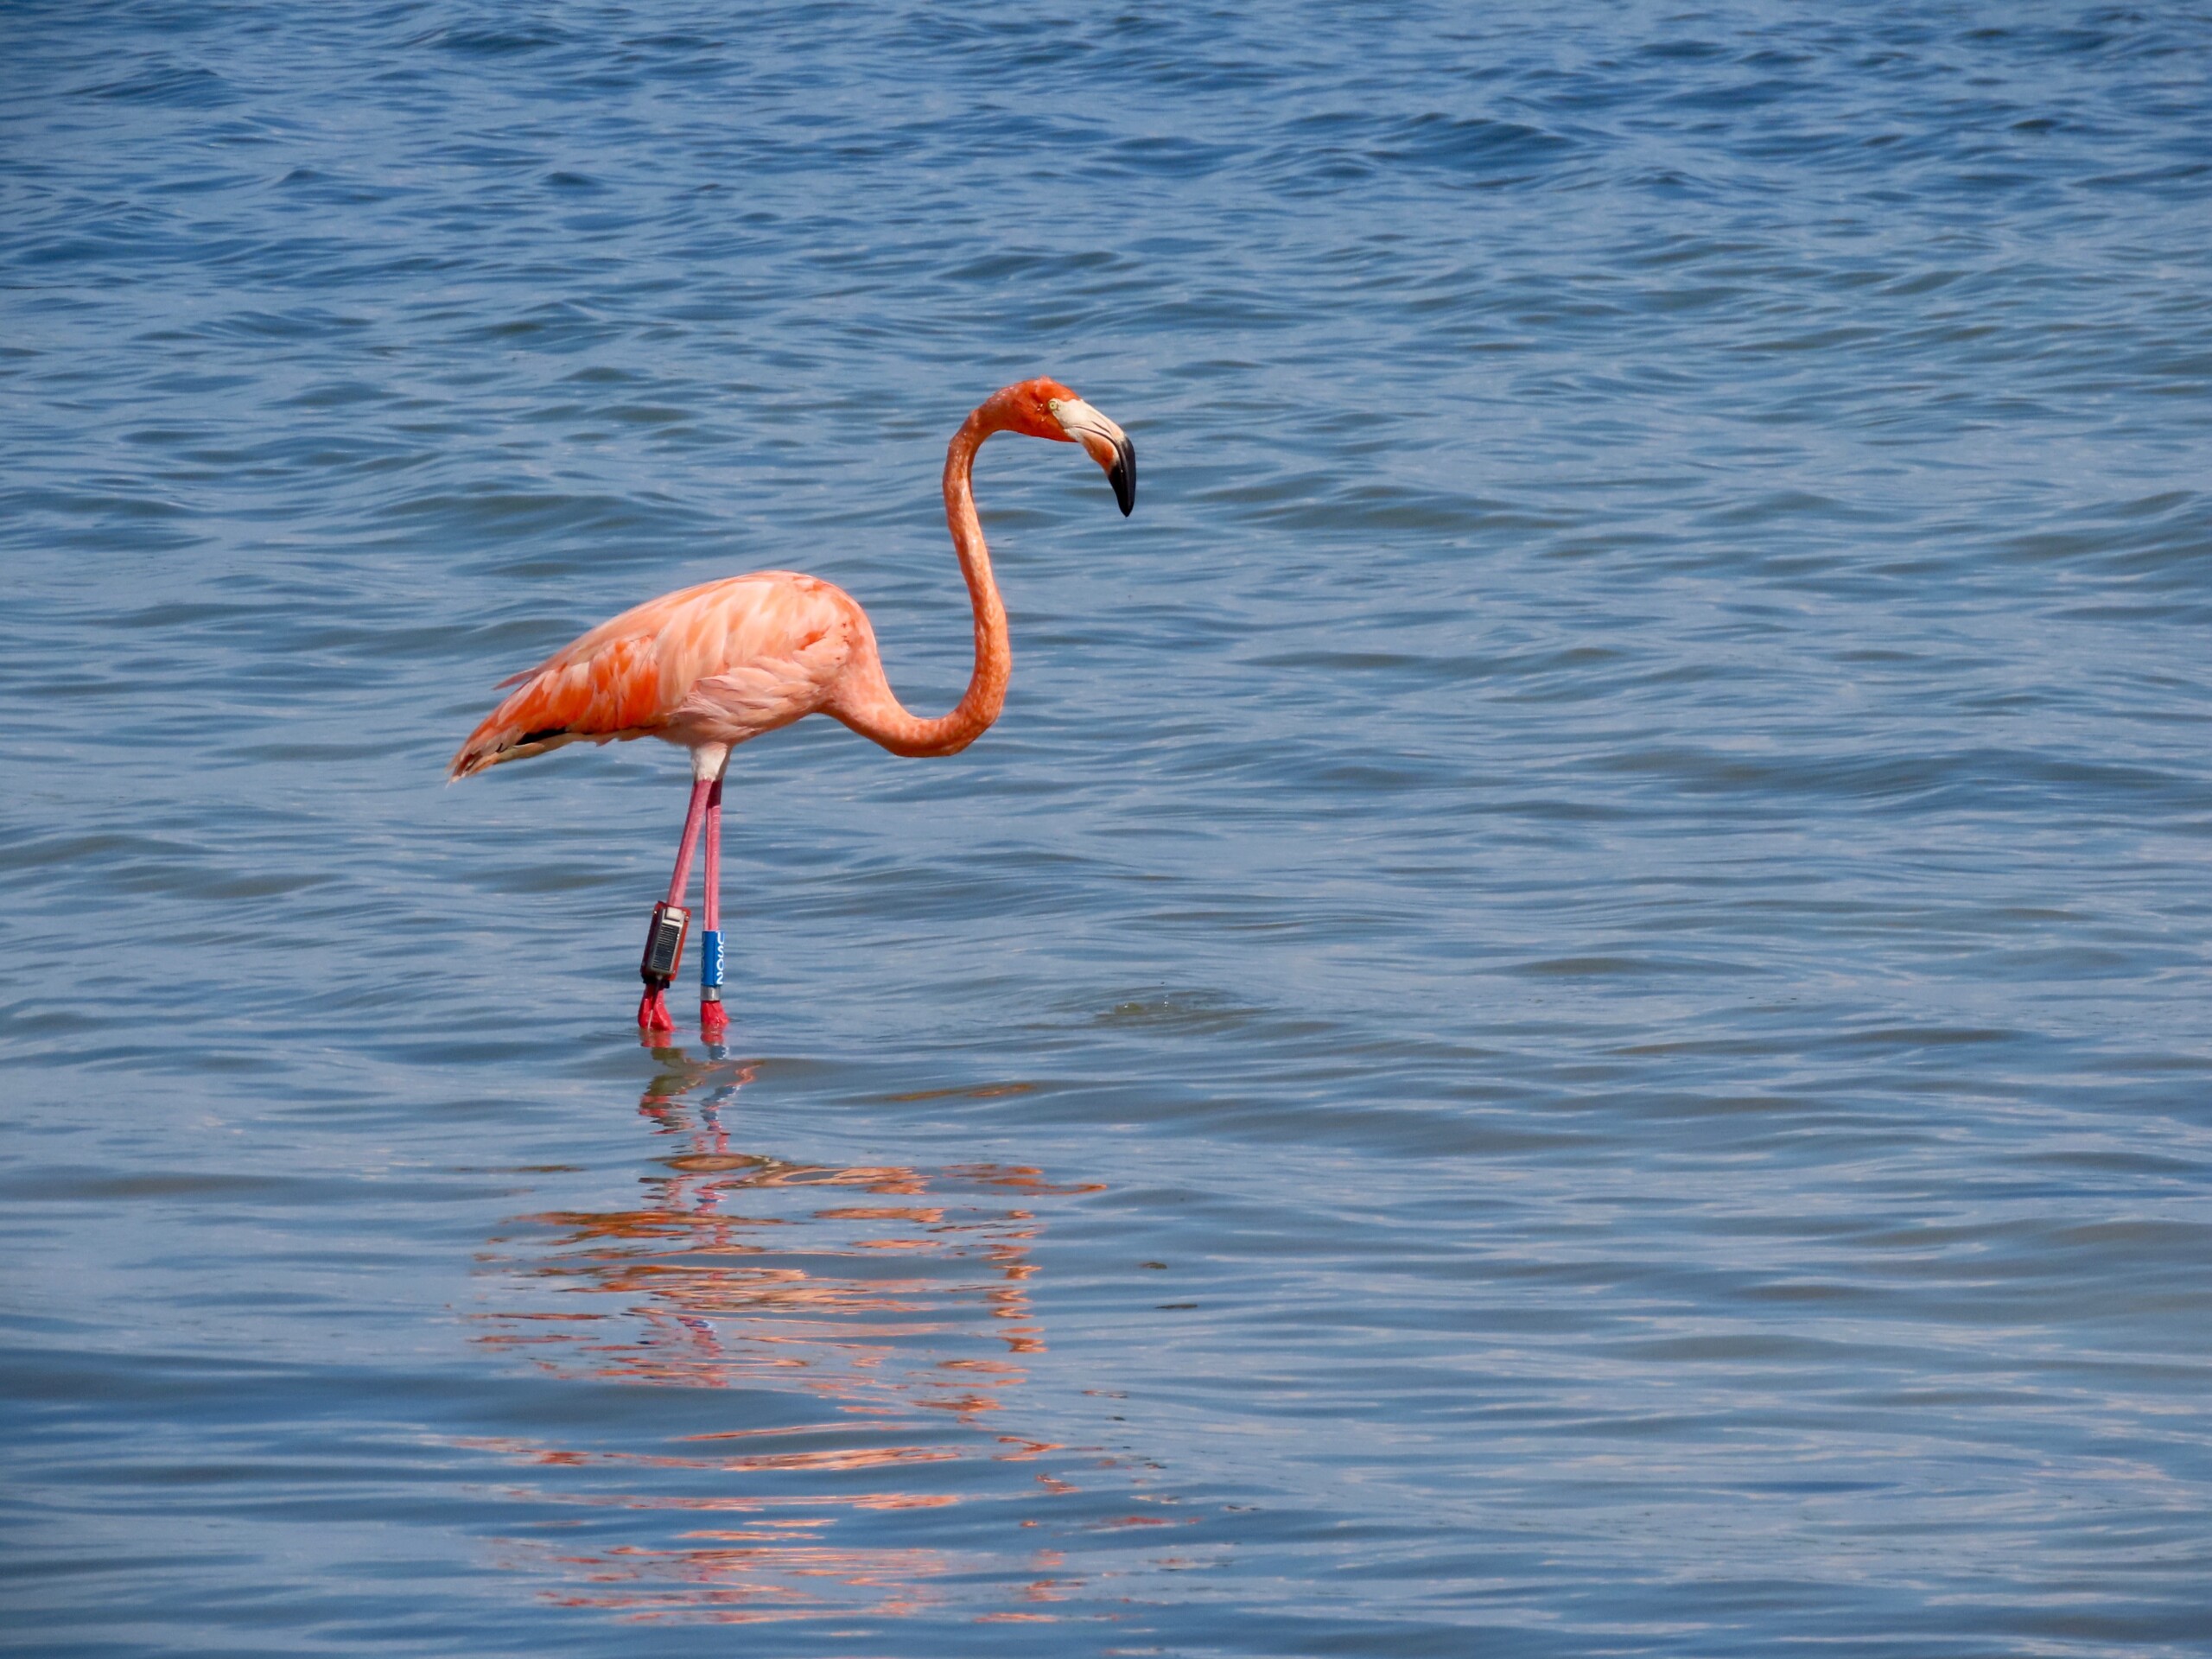 Featured image for “American Flamingo may ride ‘pink wave’ back to Florida”